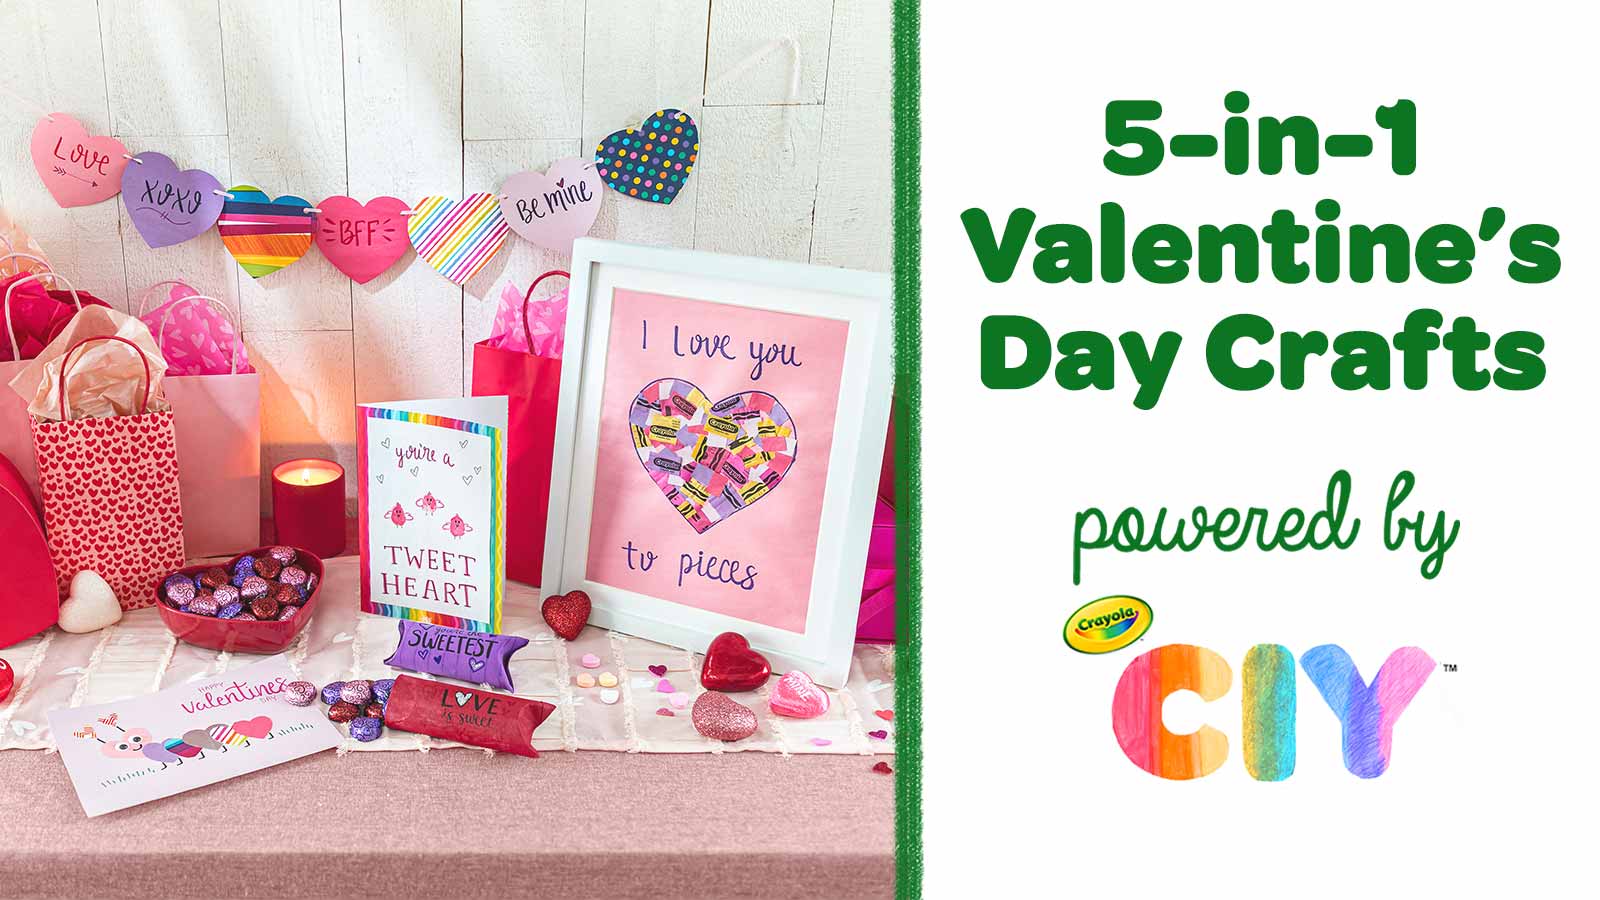 Creative Valentine's Day Arts and Crafts Kids will Love - Projects with Kids